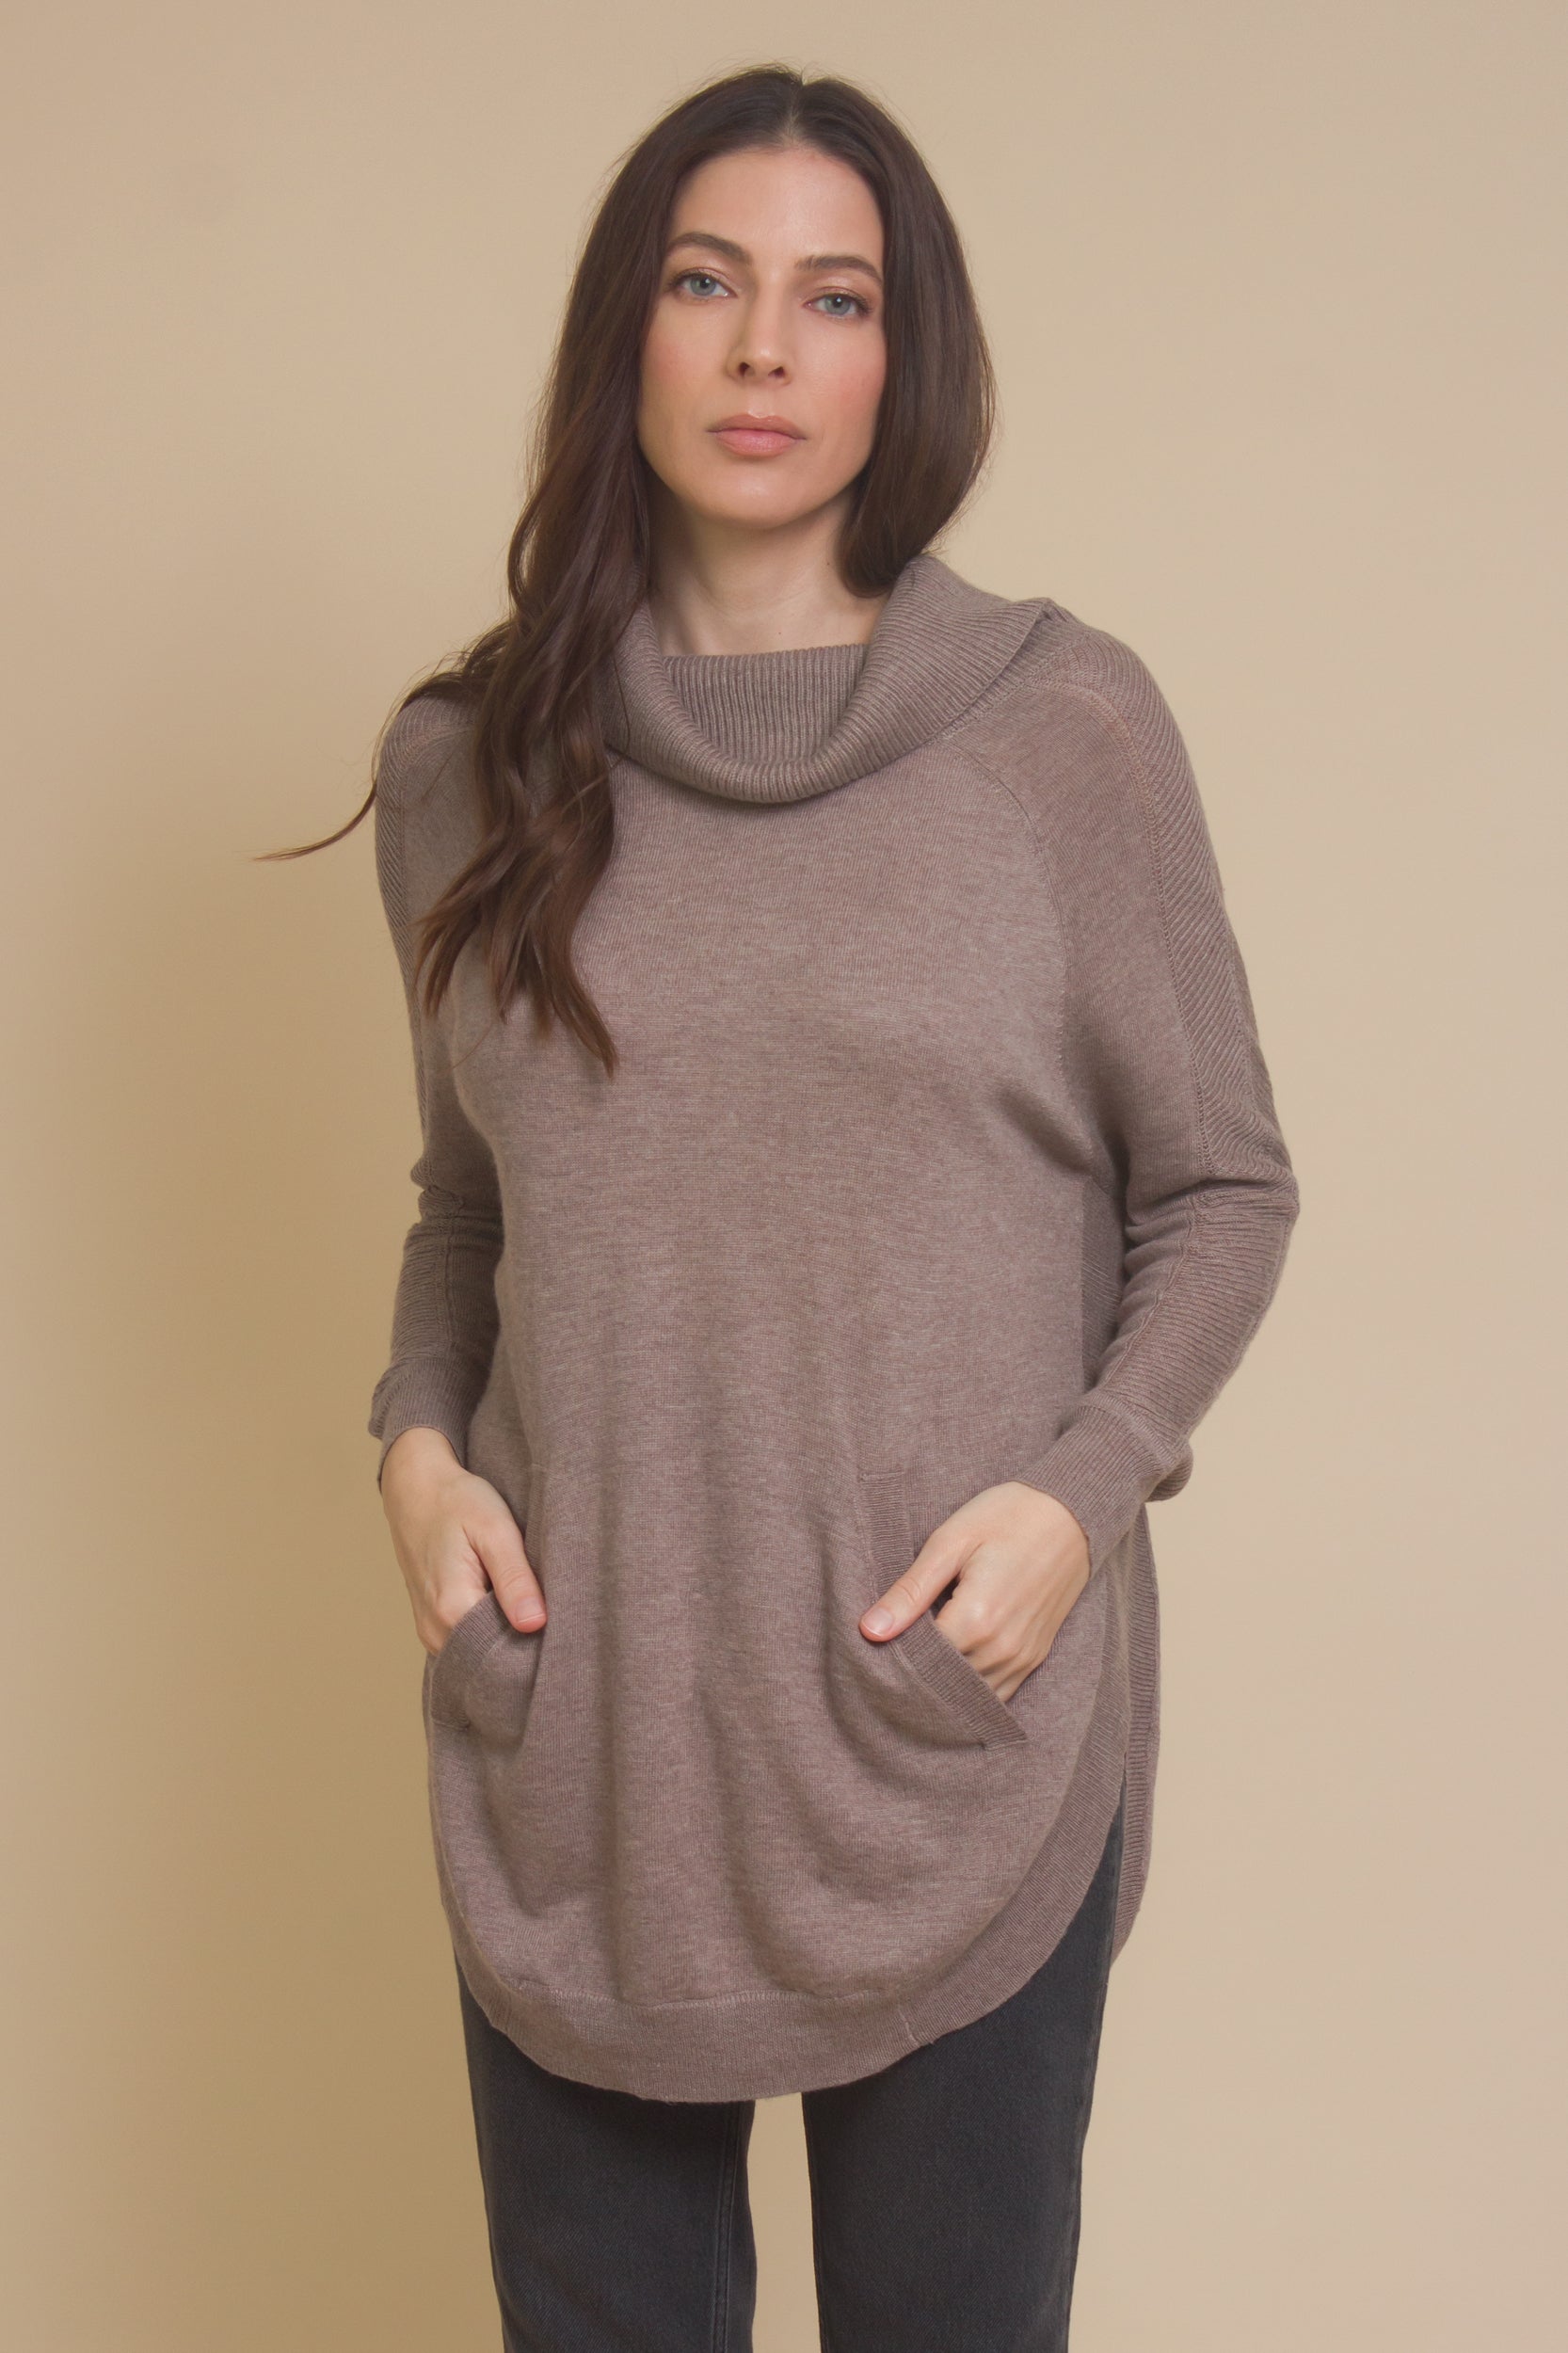 Fate by lfd cowl neck sweater with slant pockets, in mocha.